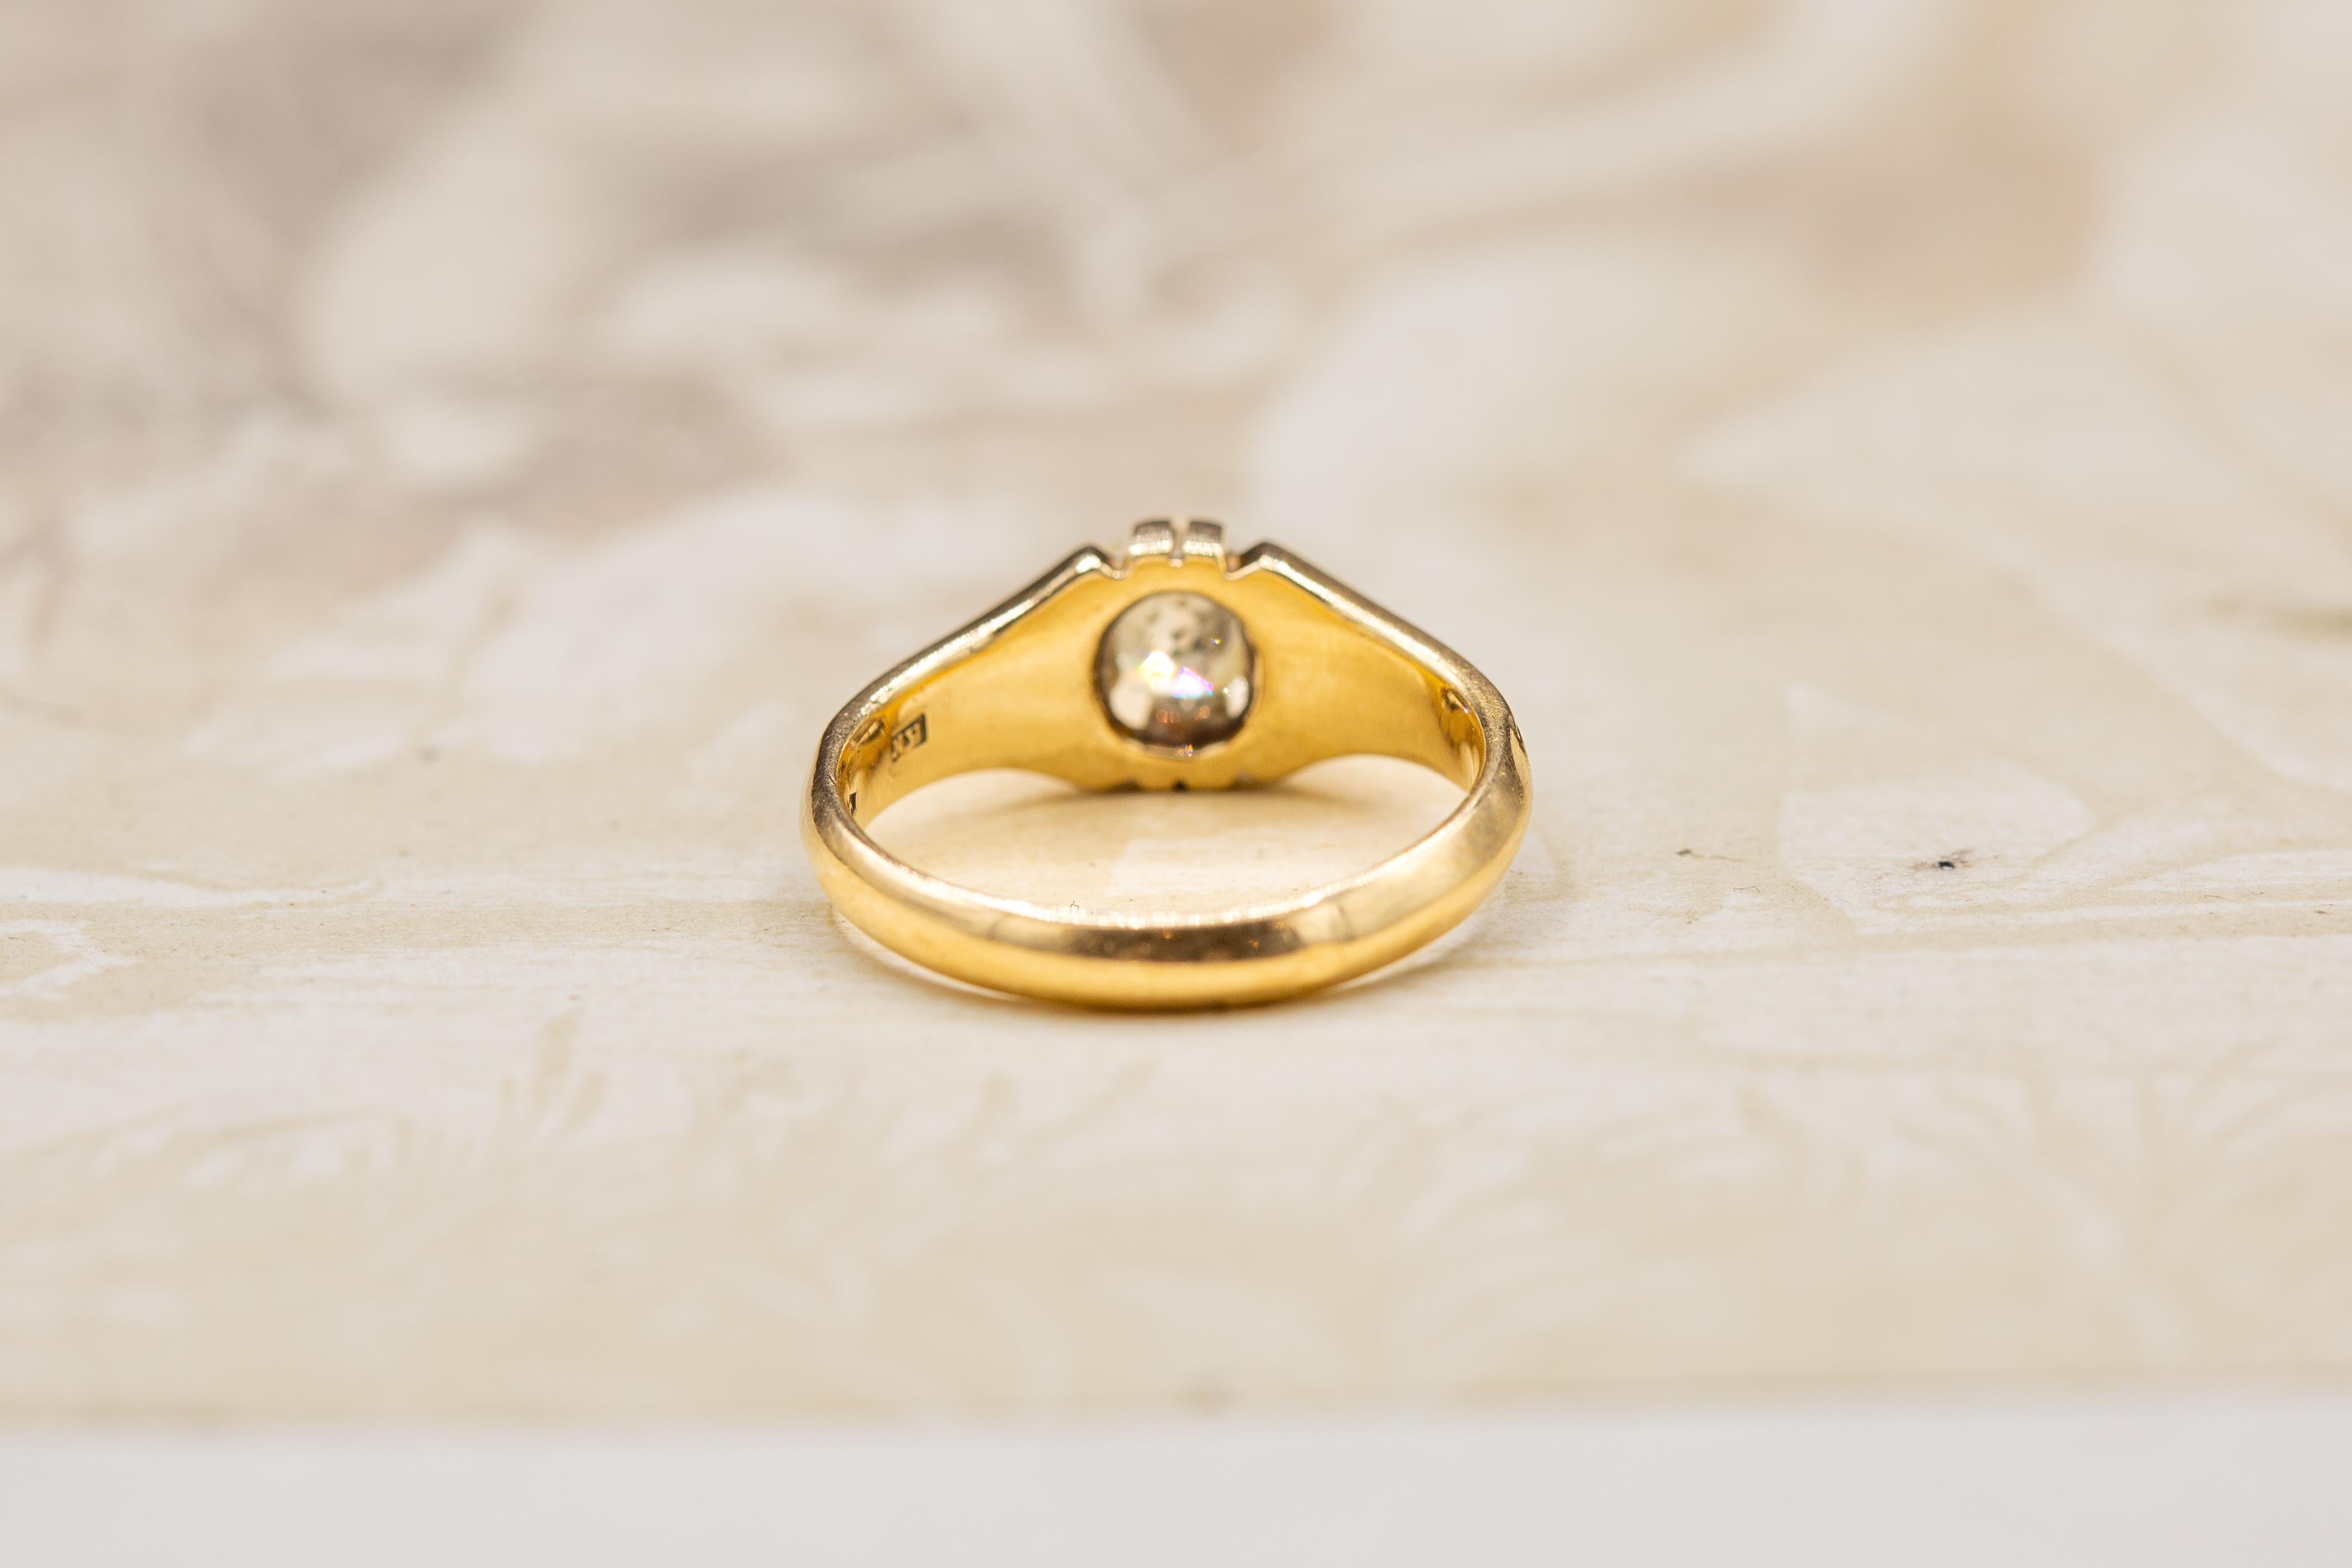 Antique Cushion Cut Diamond Solitaire 14K Gold Ring Band Signet Ring For Sale 4